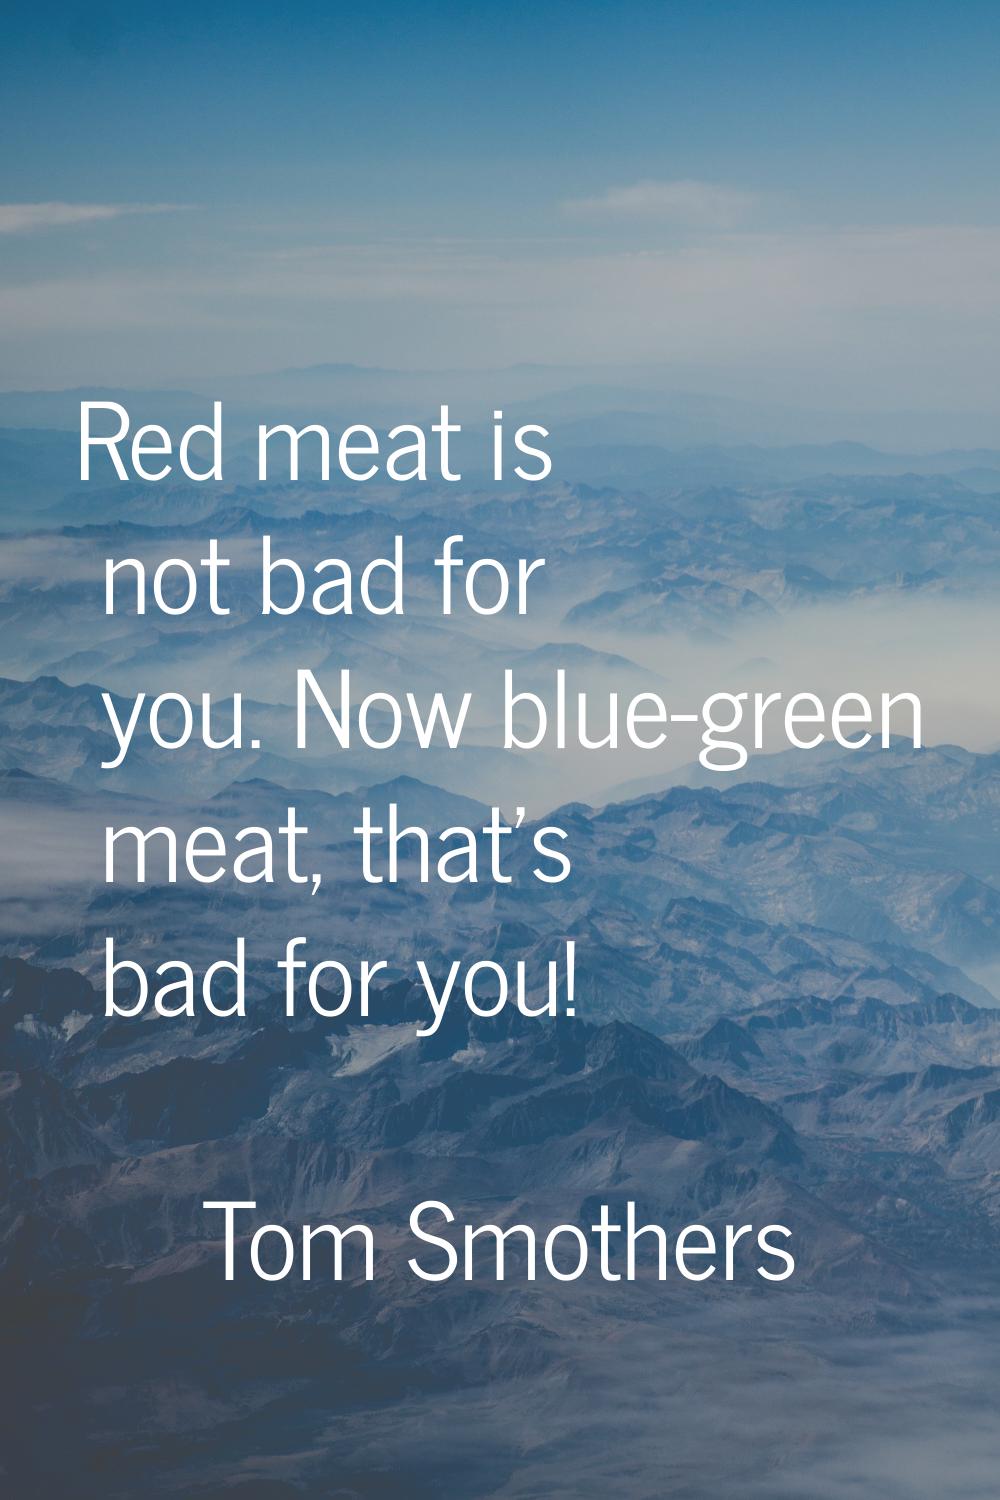 Red meat is not bad for you. Now blue-green meat, that's bad for you!